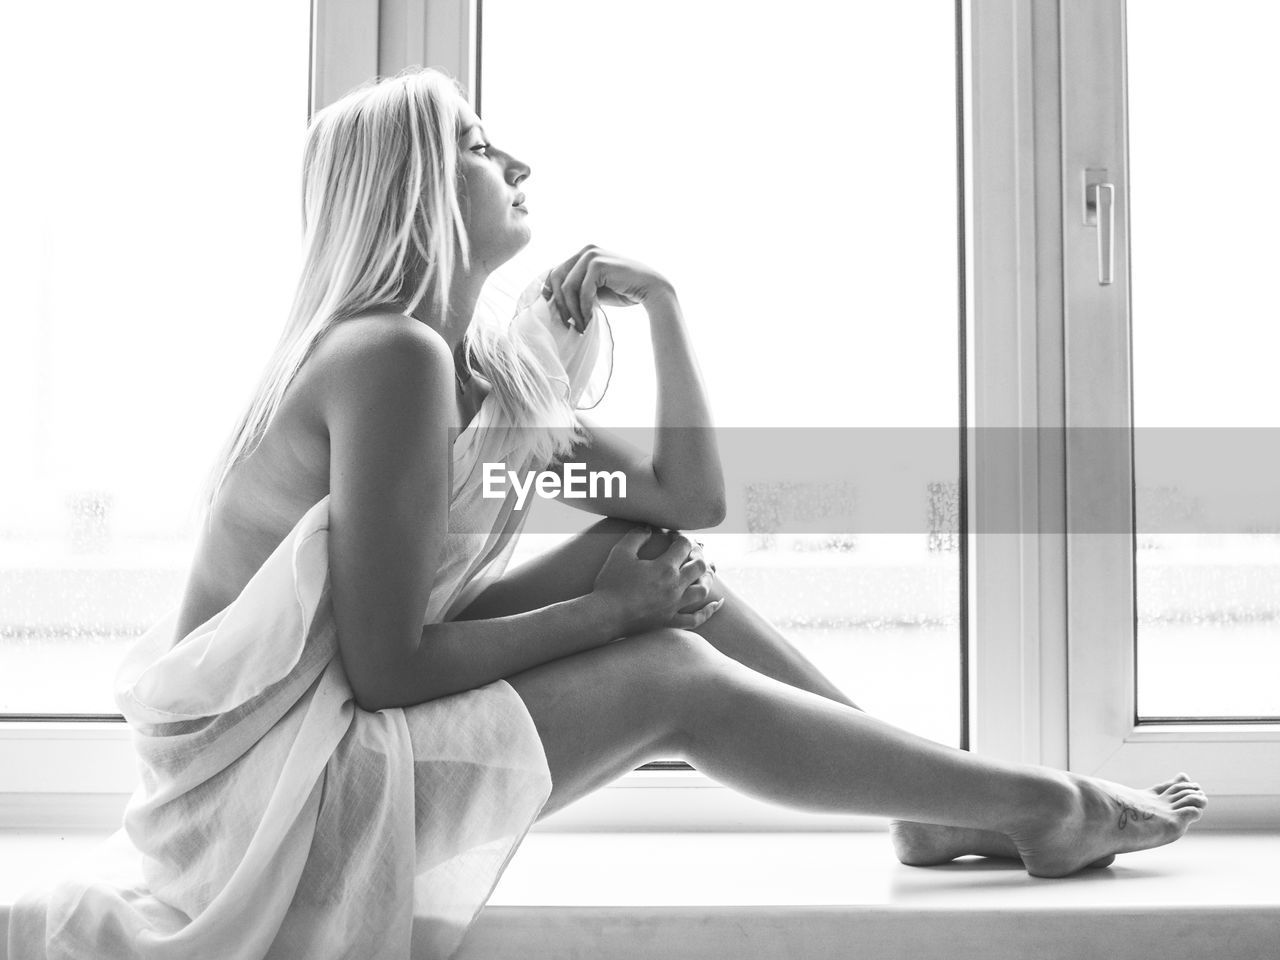 Sensuous woman wrapped in fabric sitting on window sill